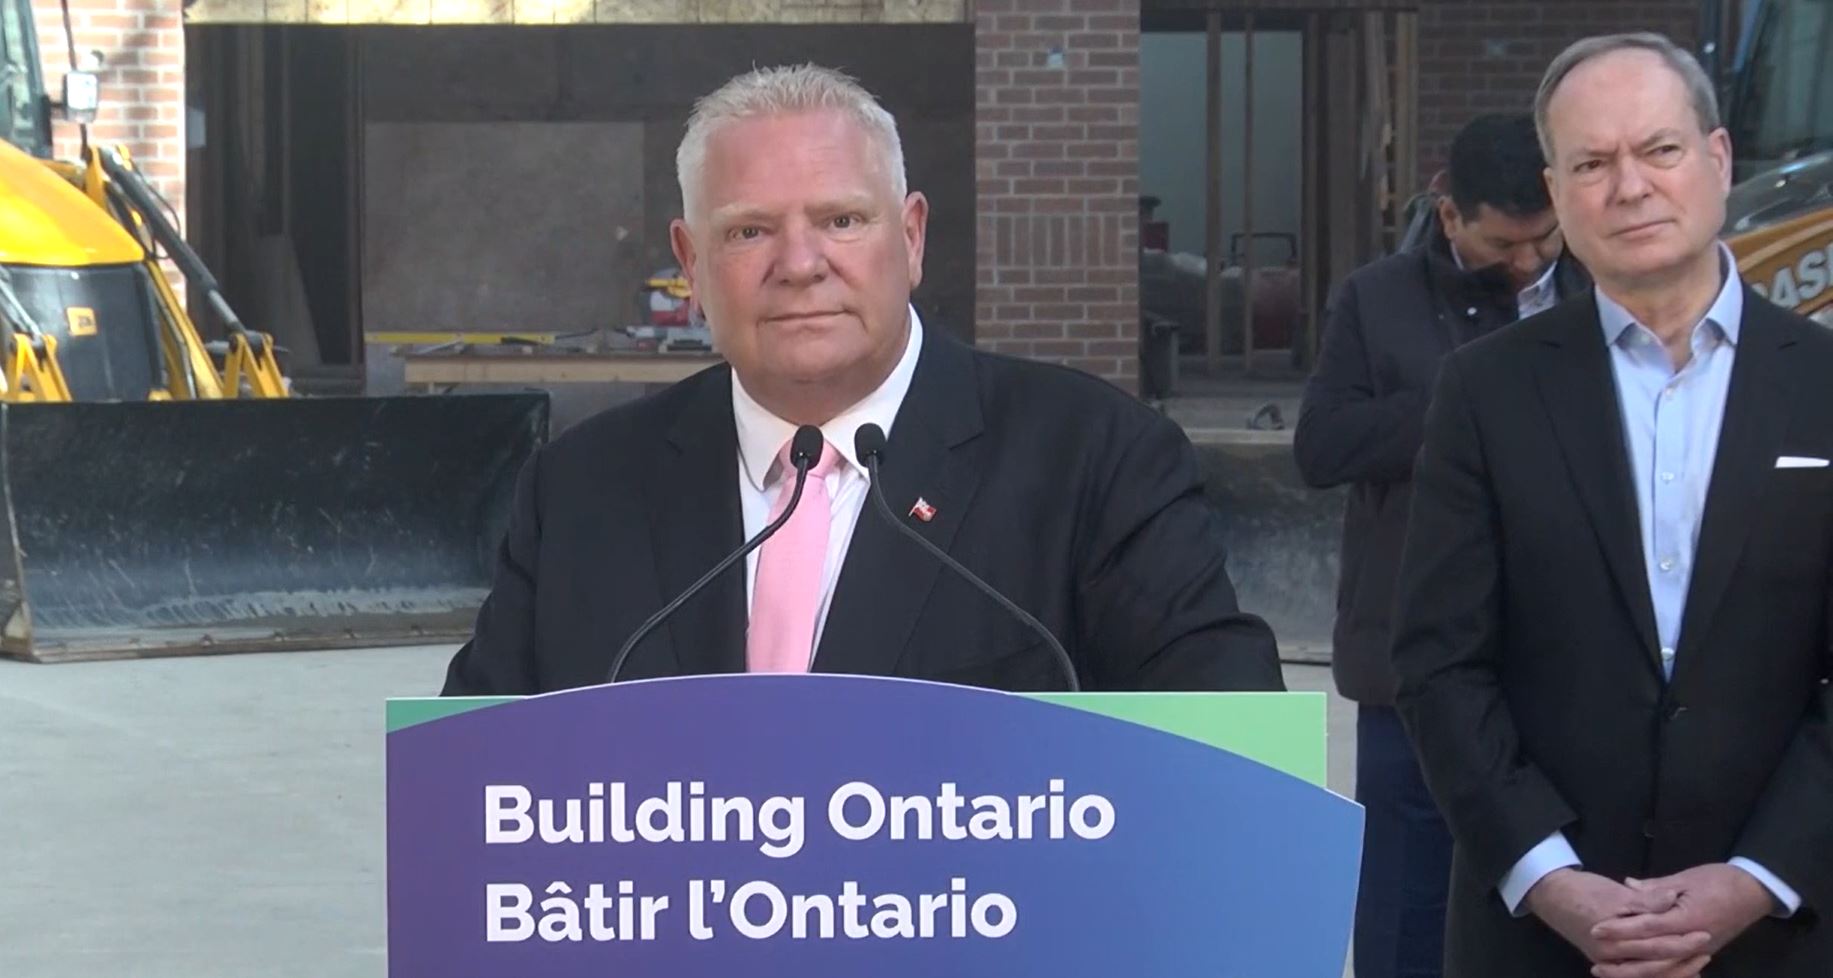 Plans to build, upgrade training centres announced ahead of Ontario budget day